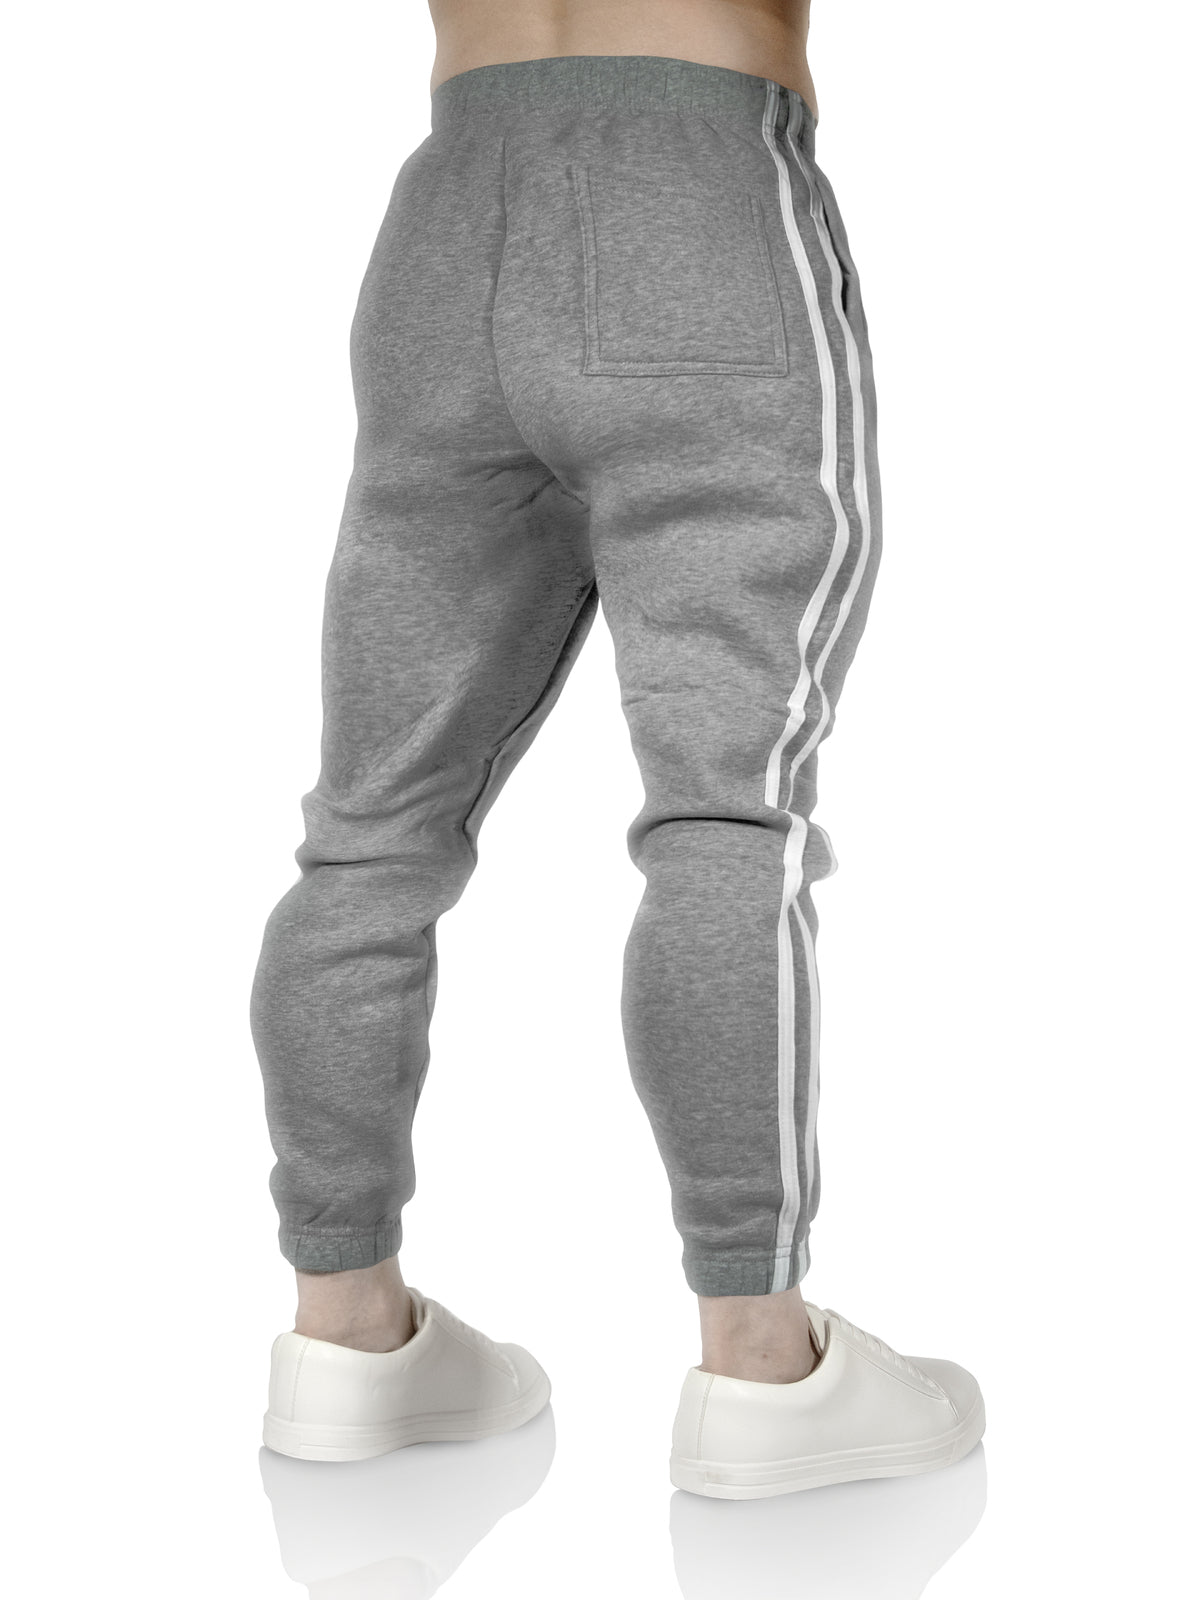 Mens Fleece Skinny Track Pants Jogger Gym Casual Sweat Trackies Warm Trousers - Grey Marle/White Stripe - L